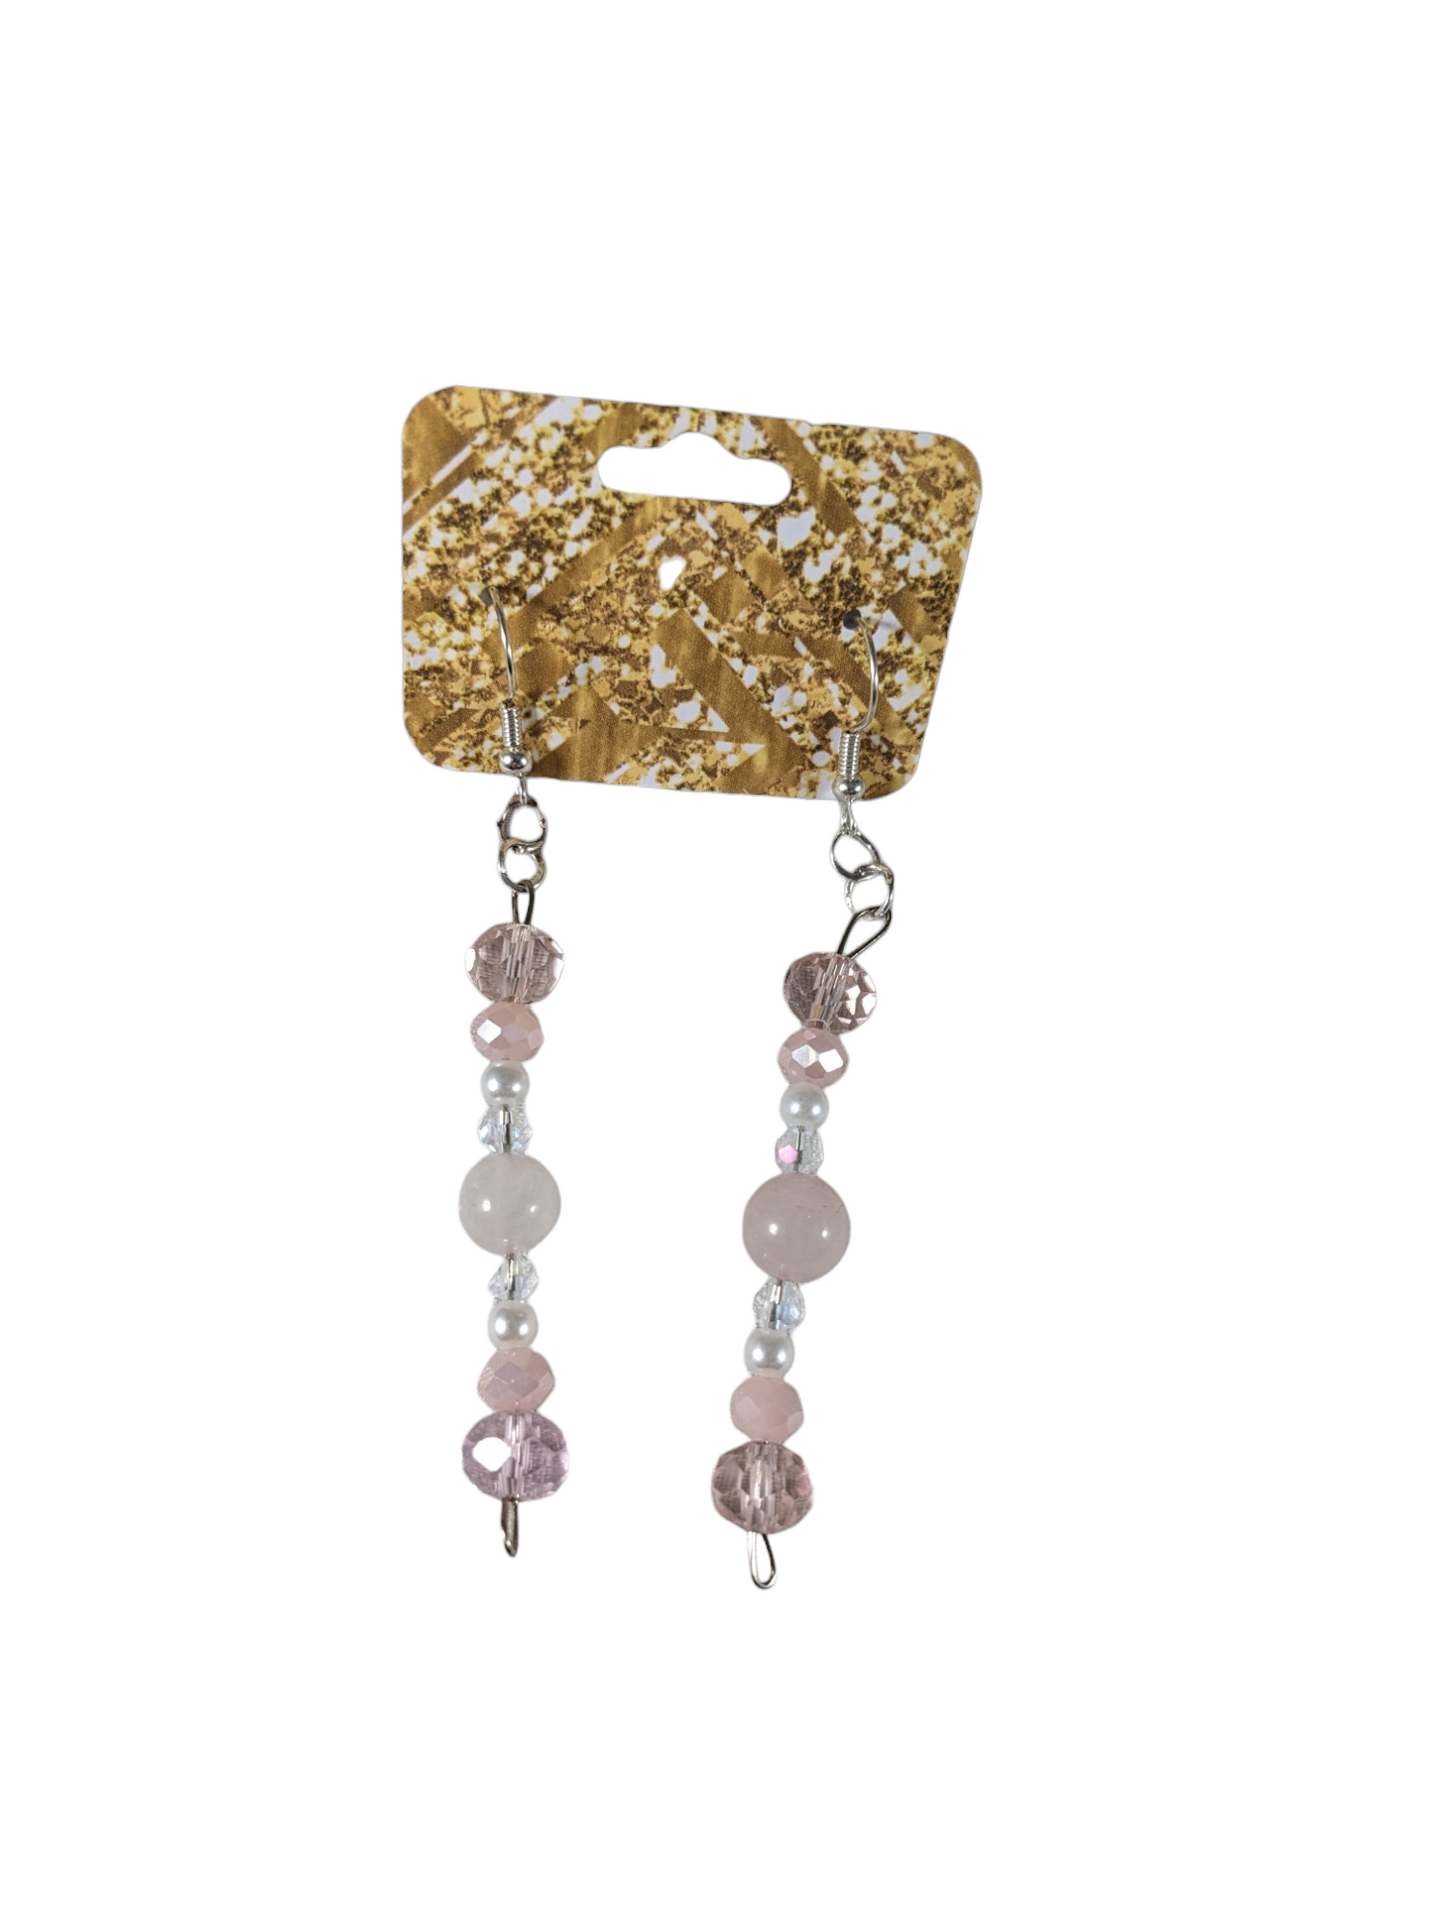 Pink quartz and white earrings by Lydia